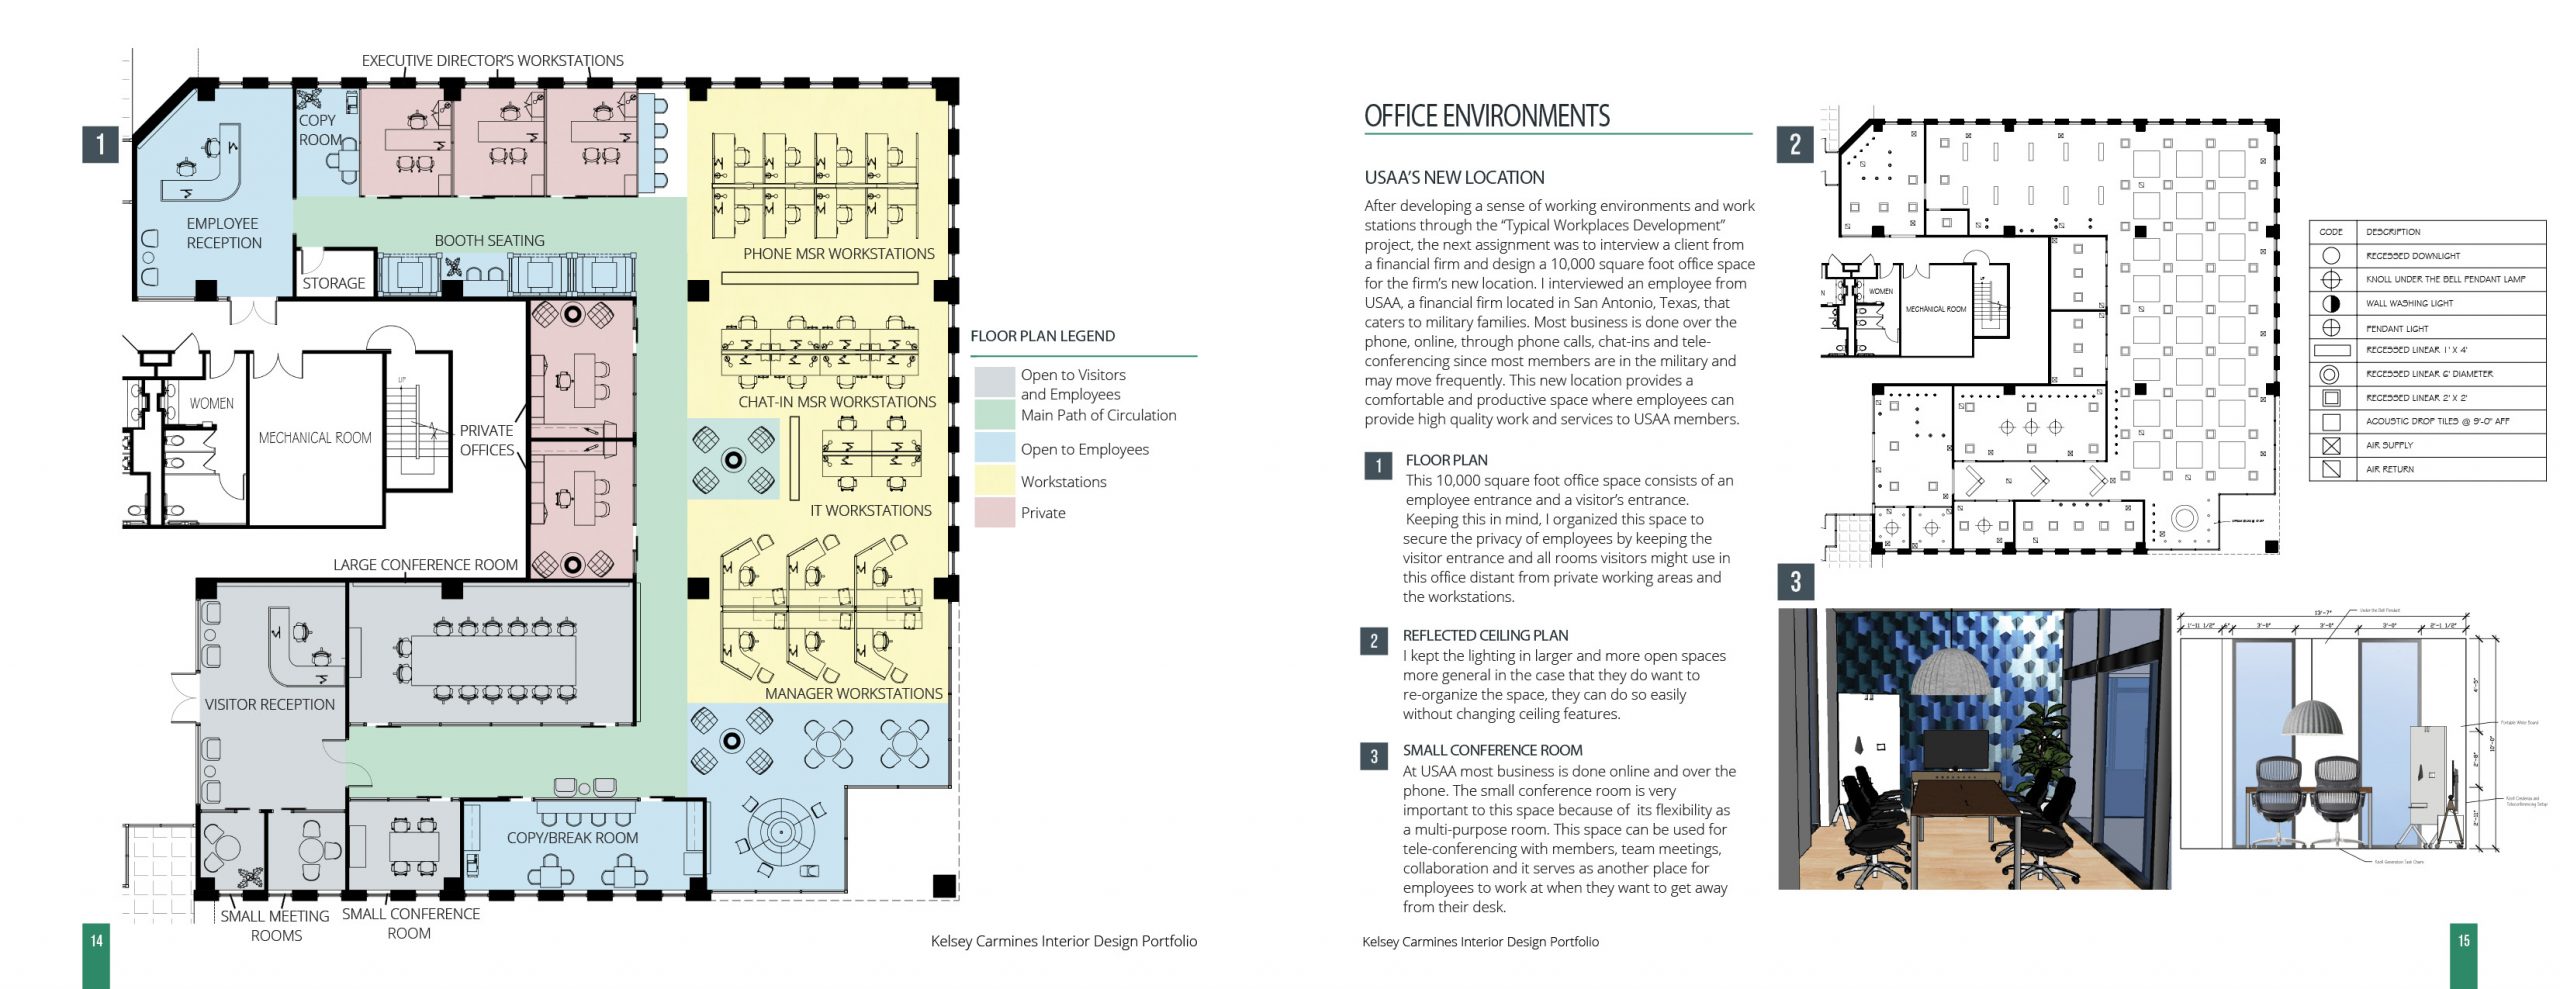 Office environments, Floor and reflected ceiling plan, small conference room design 